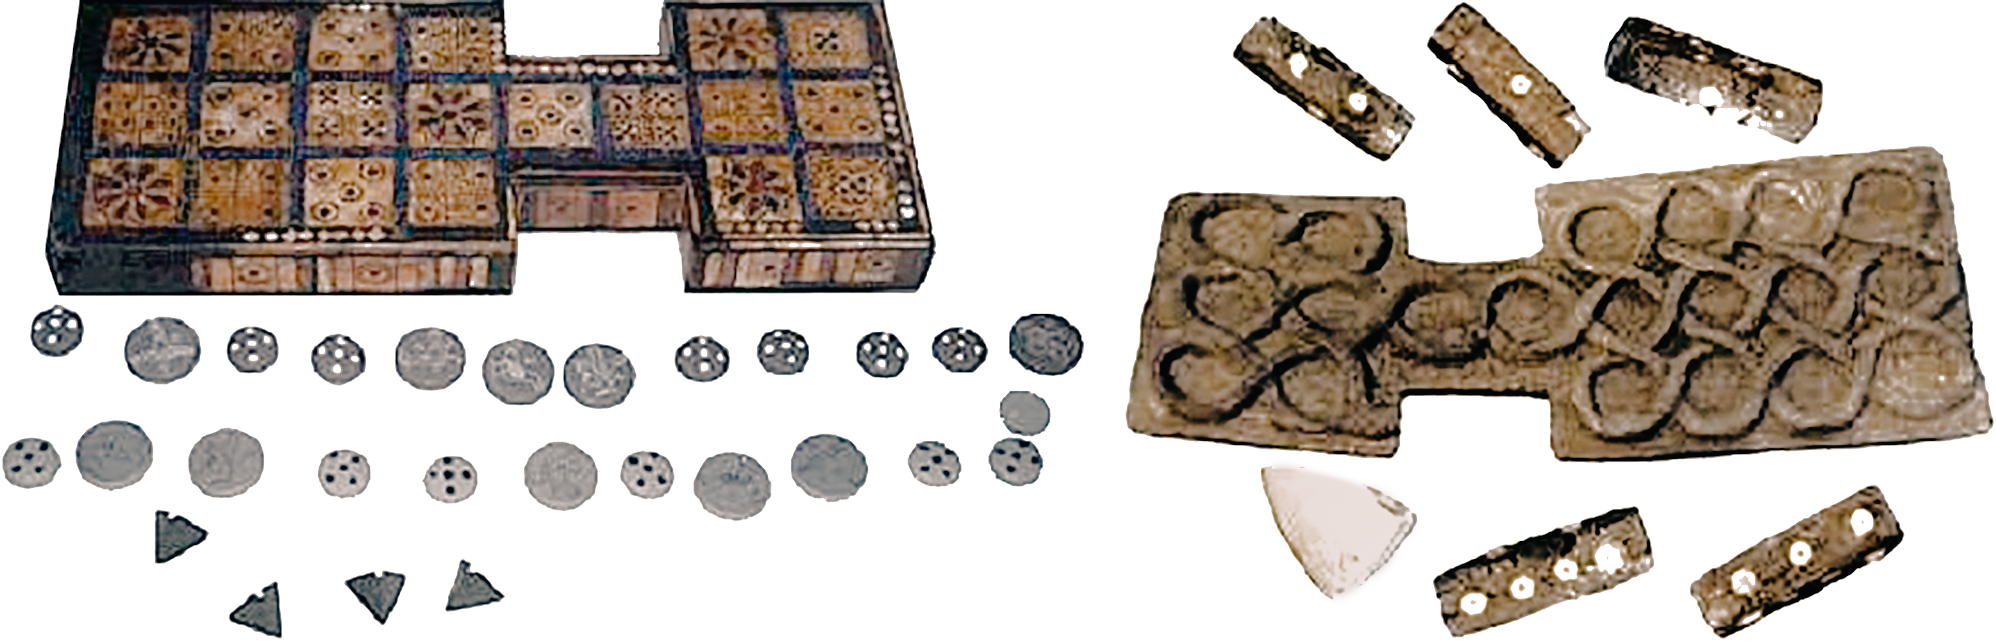 Board game from the Royal Cemetery of Ur British Museum Board game and dies from Shahr-e Sukhteh National Museum of Iran